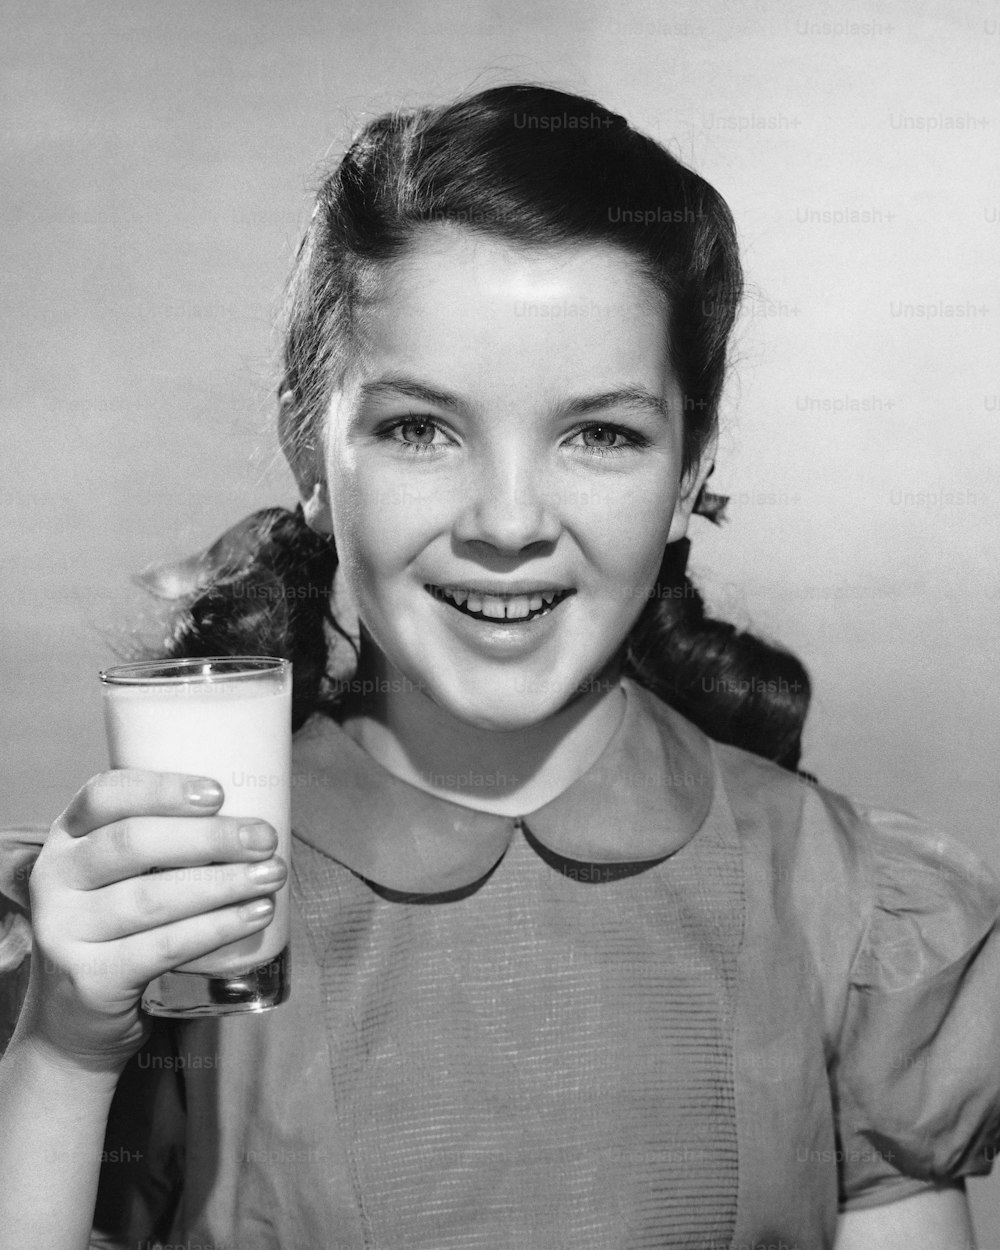 a young girl holding a glass of milk